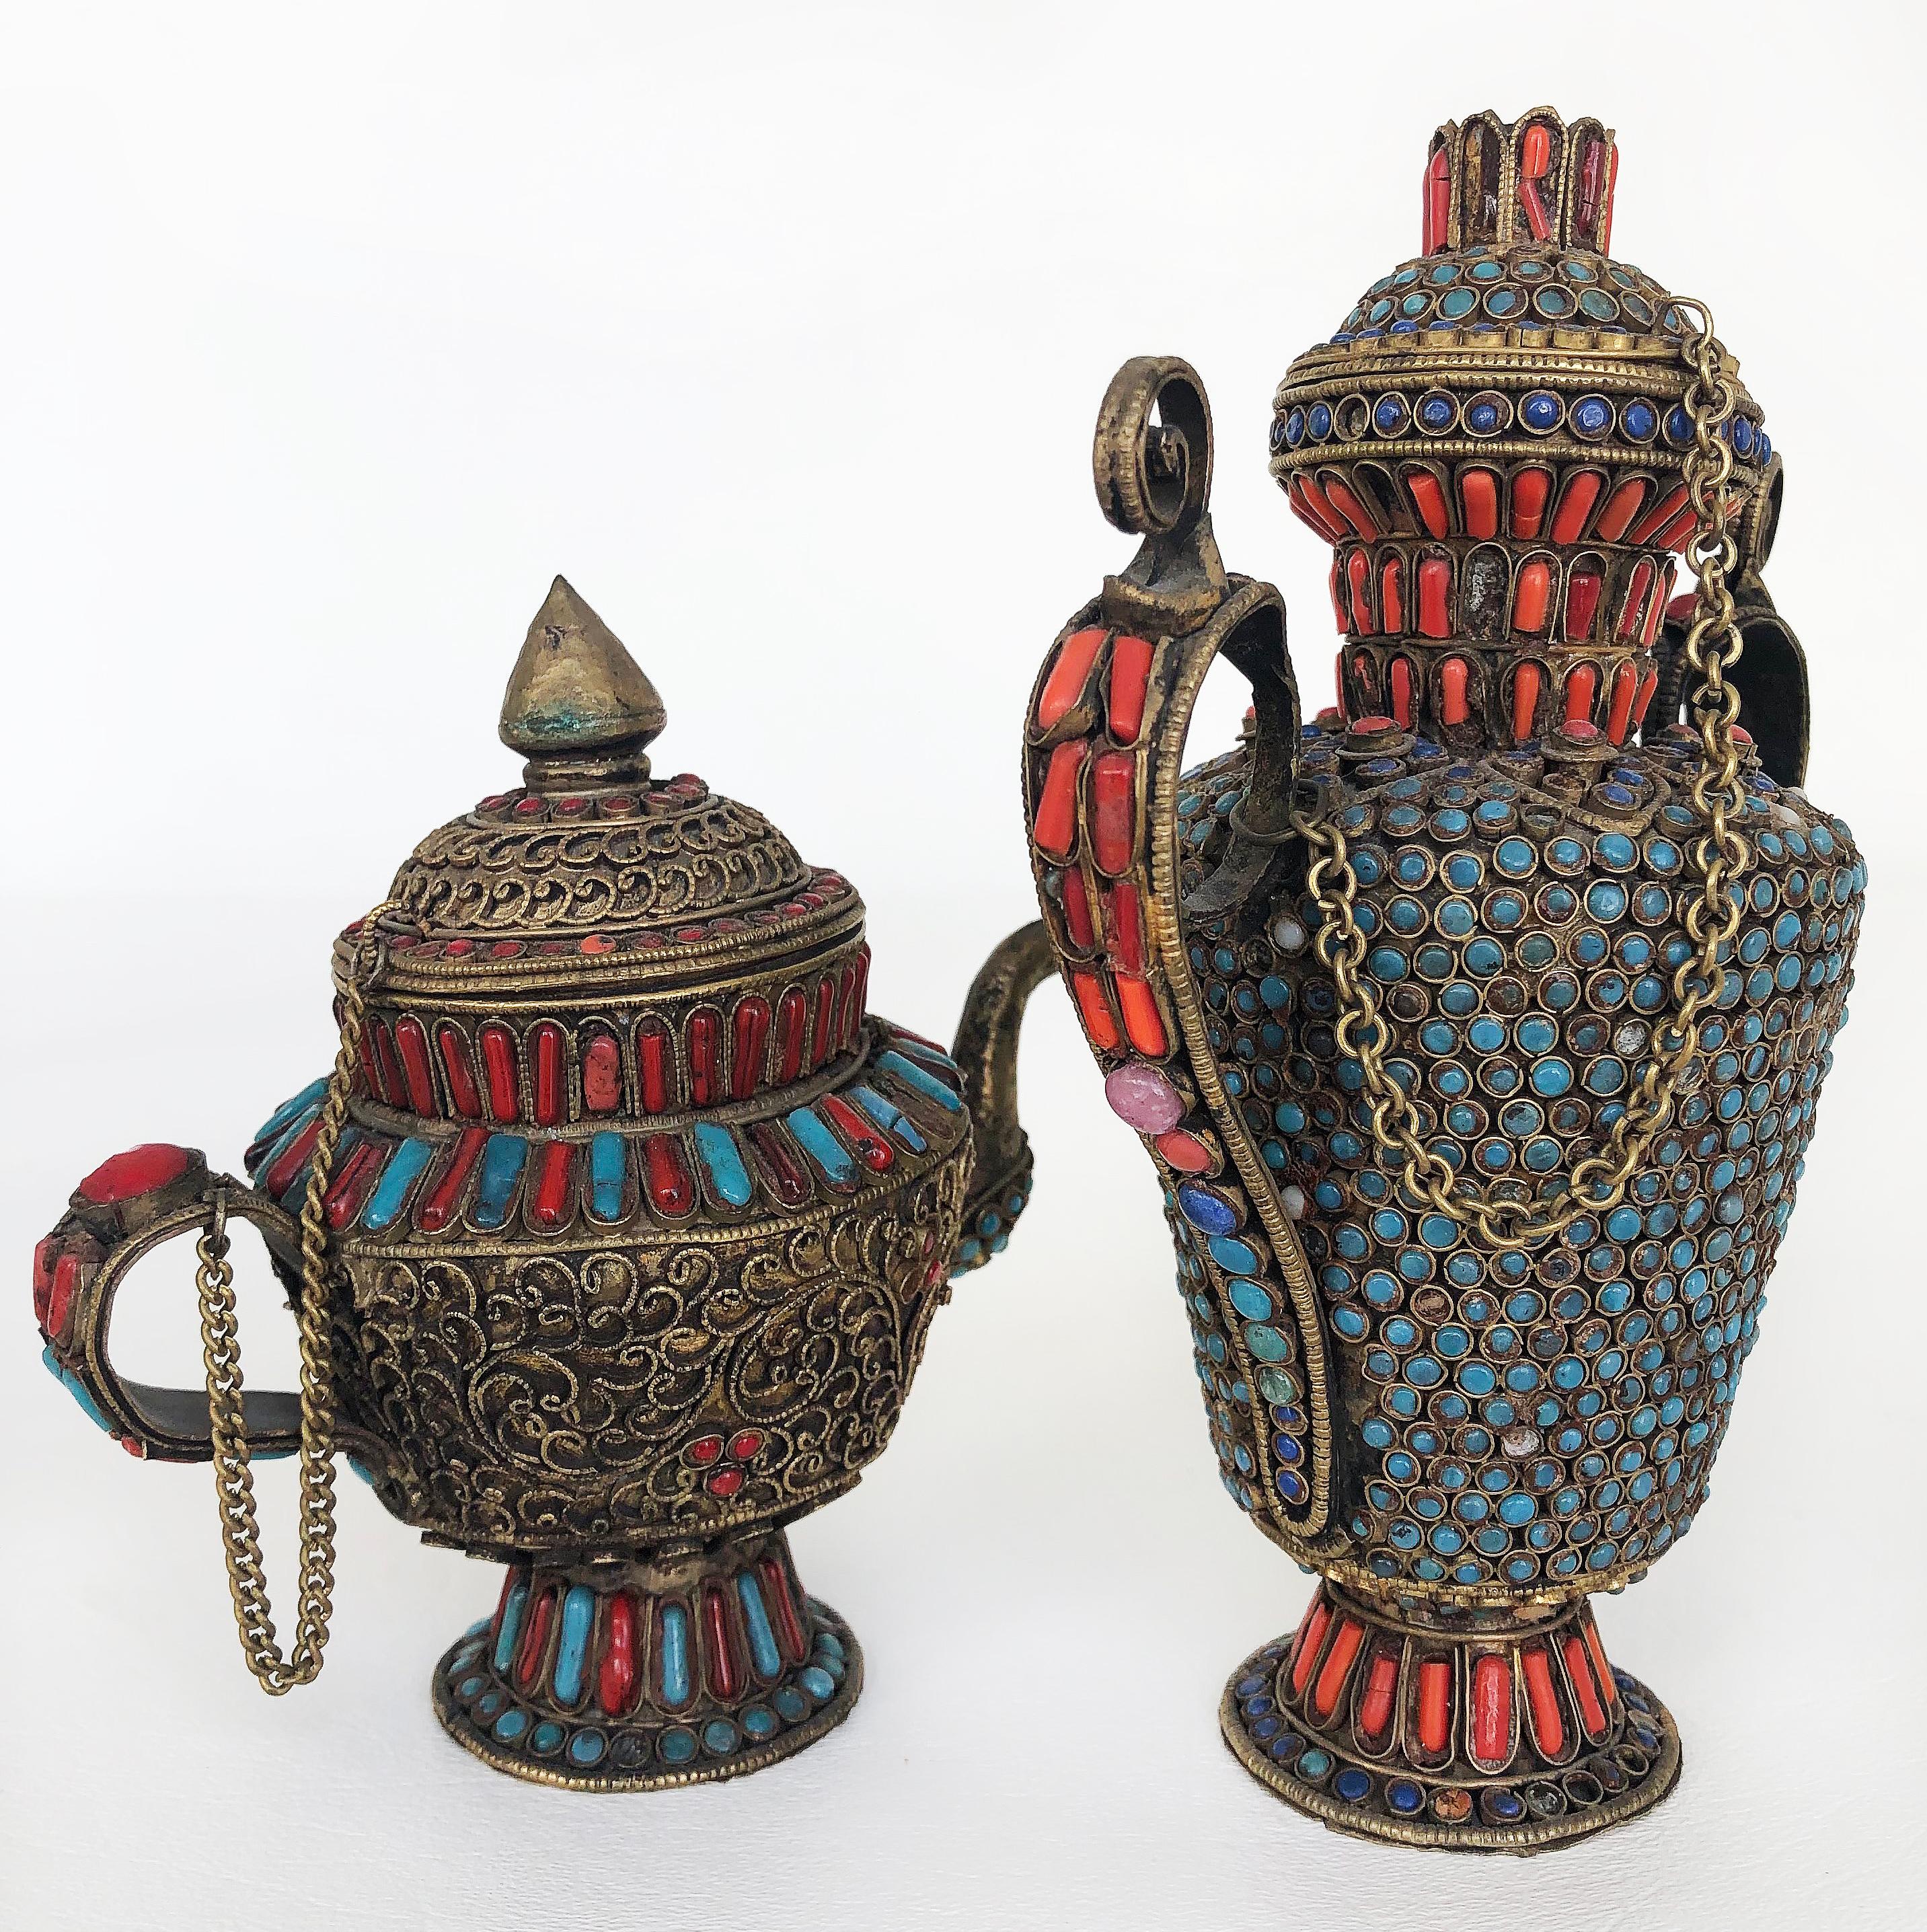 Tibetan urns, animals, Ganesh, bird in coral and turquoise, 4 pieces.


Offered for sale is a collection of 4 (FOUR) Tibetan filigree objects embellished with coral and turquoise. The grouping consists of animals, a ganesh, and covered urns. Fine